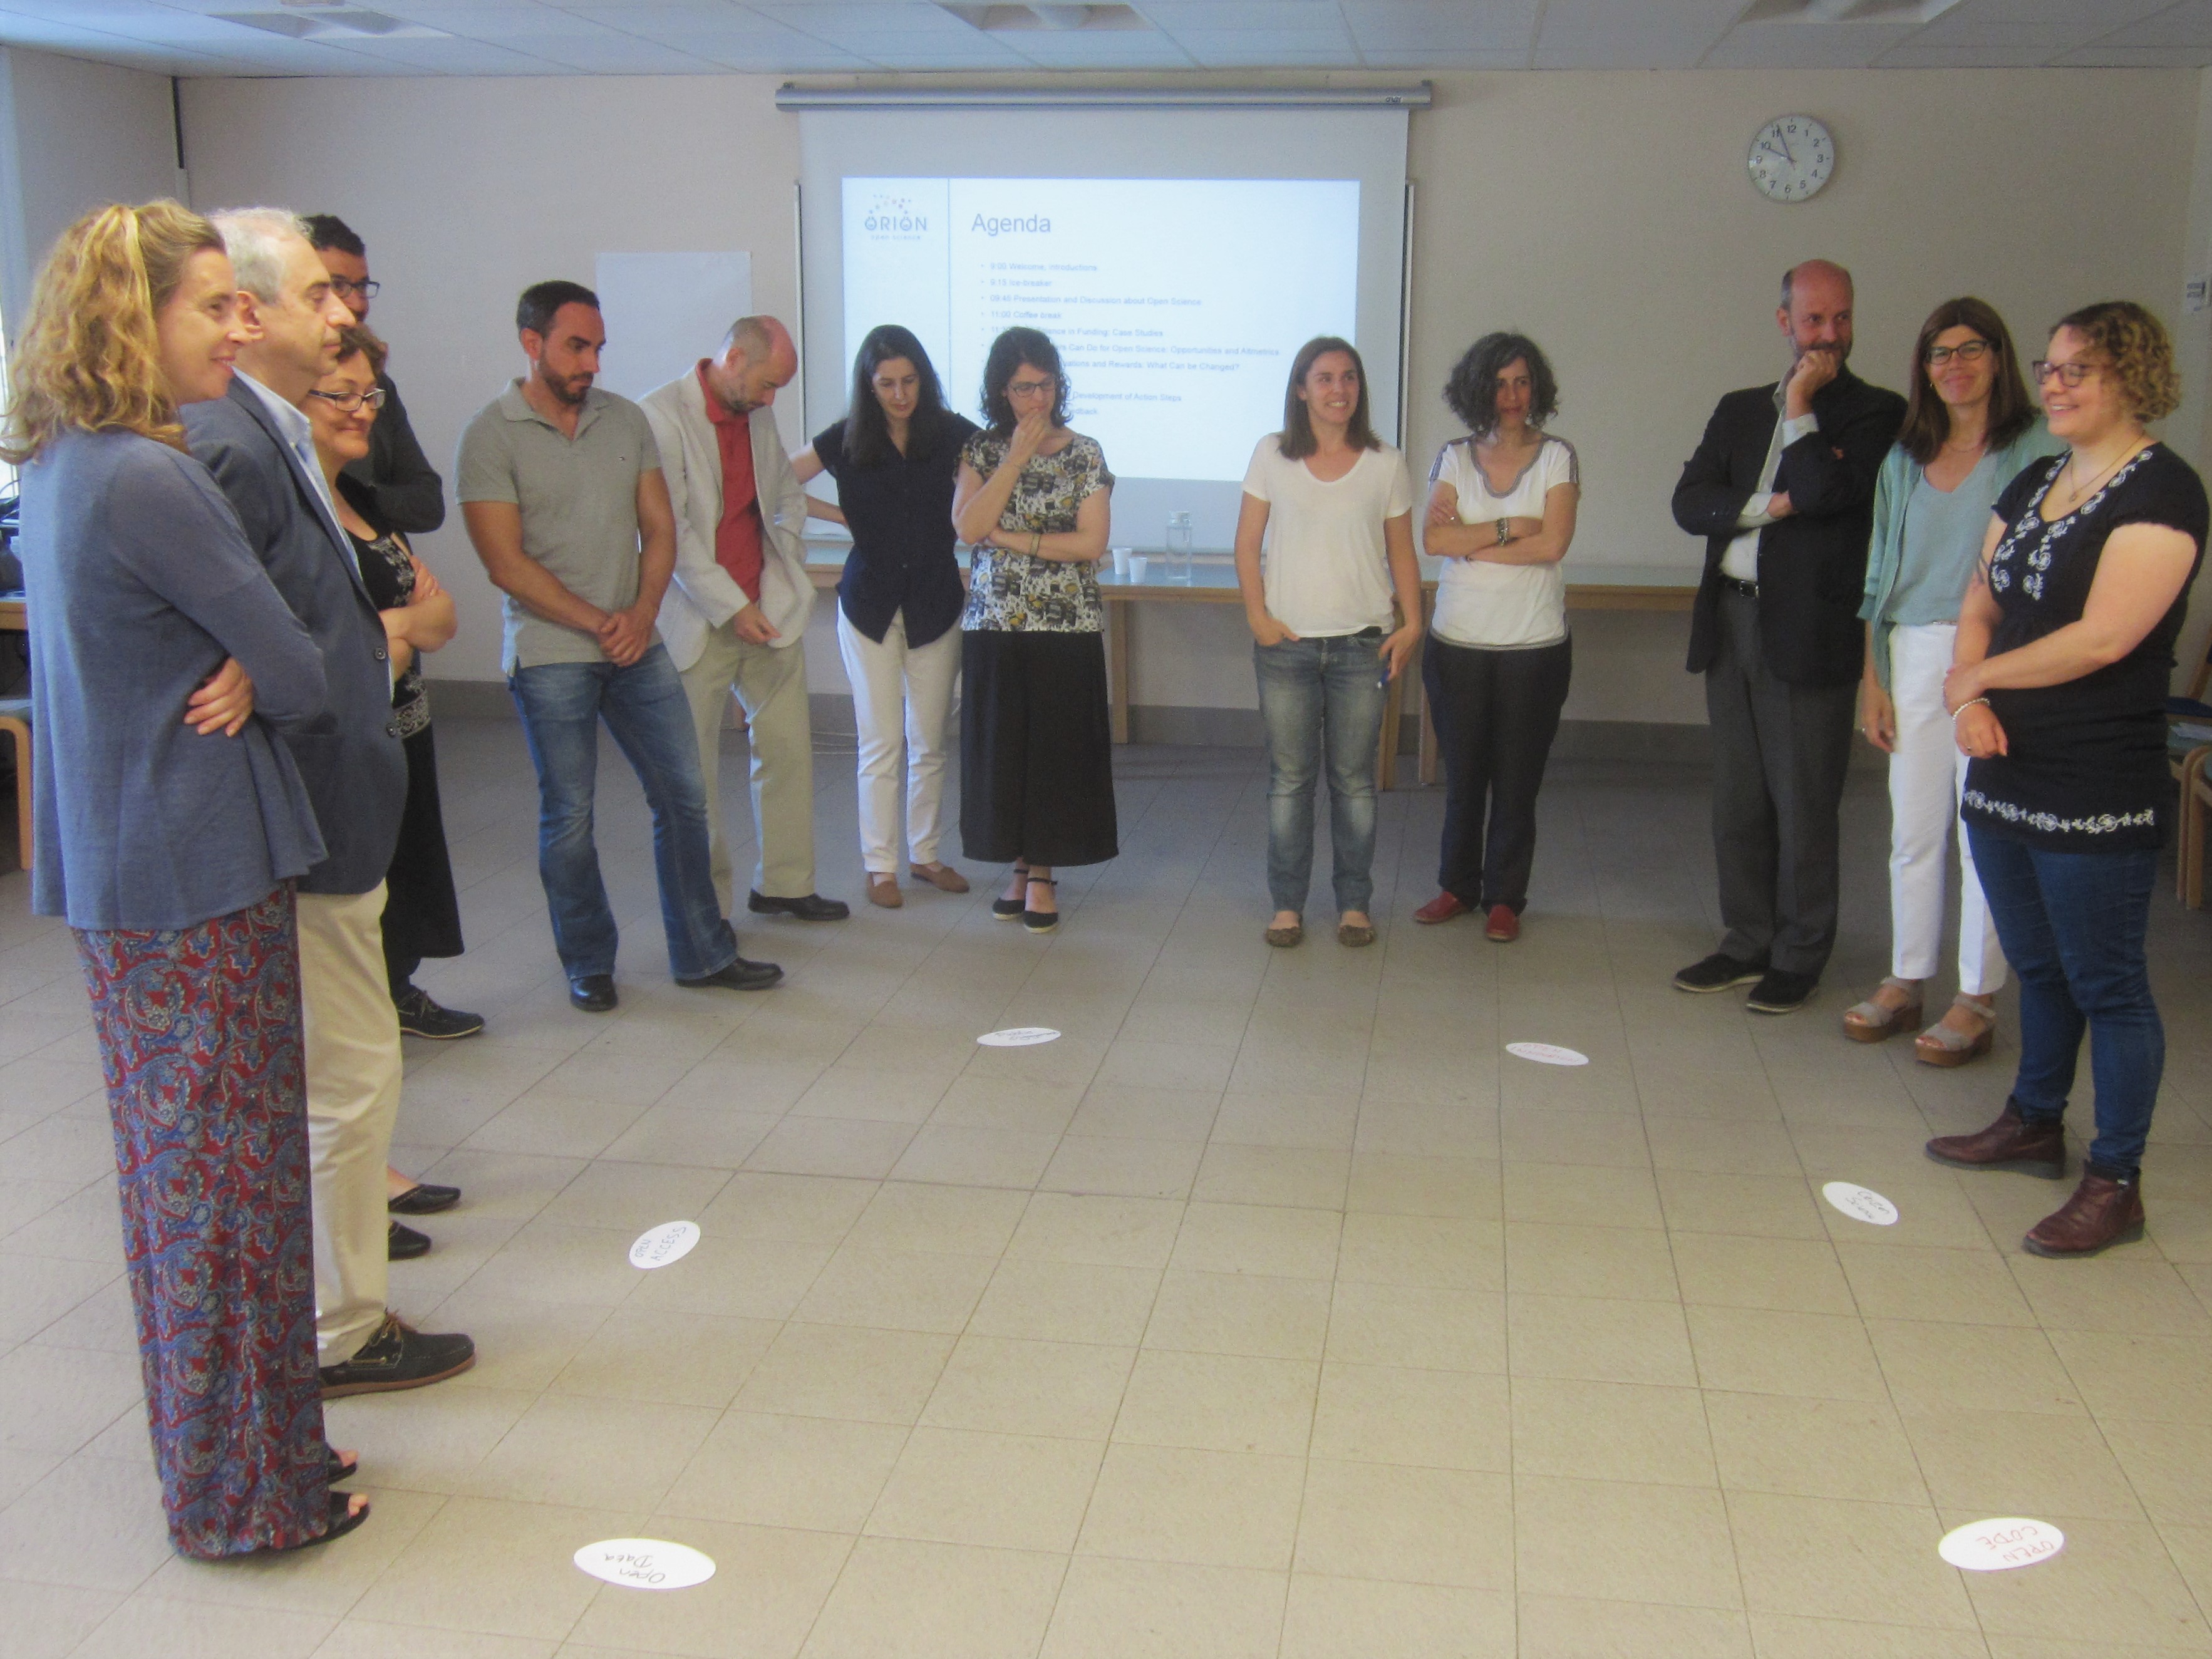 Participants standing in a semi-circle